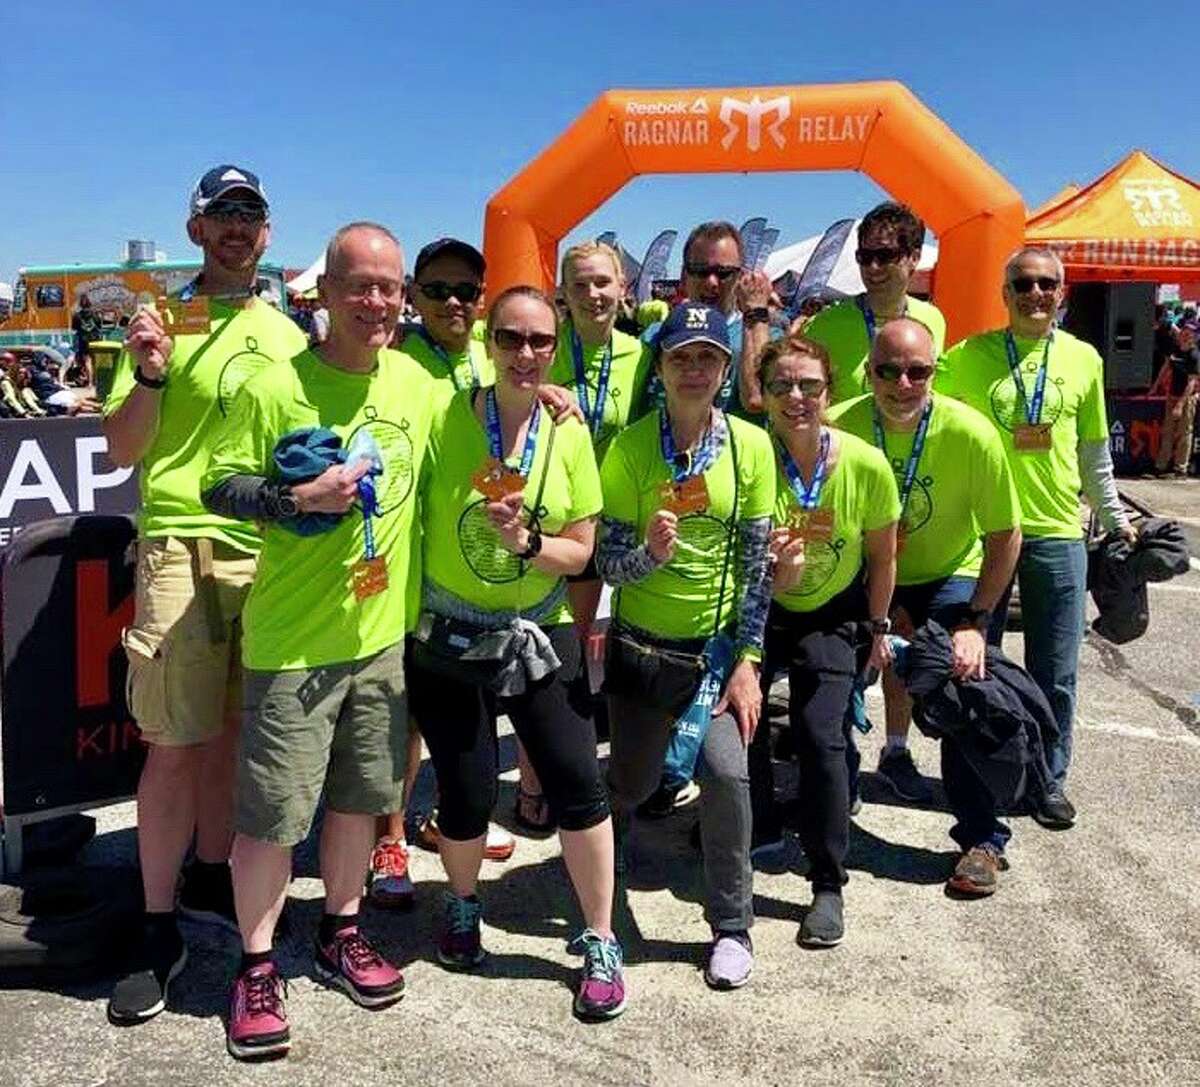 Team Your Pace or Mine included: Captain Steve Mortinger, Sean Connelly, Kathy McGroddy Goetz, Jeff Thompson, David de Lange, Anne Lewson, Emily Carr, Brian Millburn, Brian Egge, Connor Thomas and Holly Parslow.